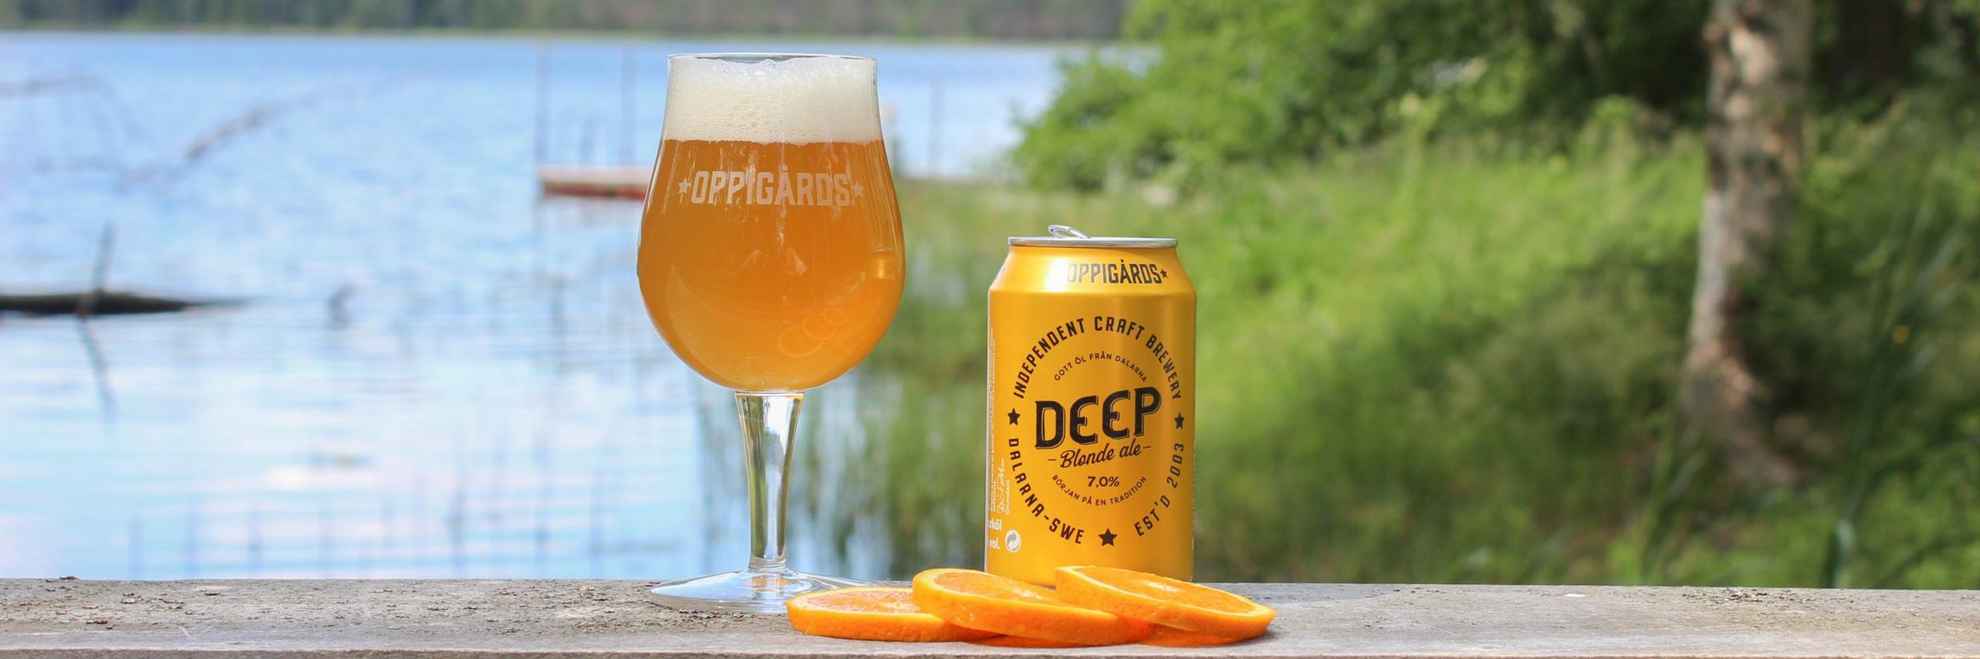 A glass of beer, a can of beer called DEEP and some slices of orange on a table with water and greenery in the background.